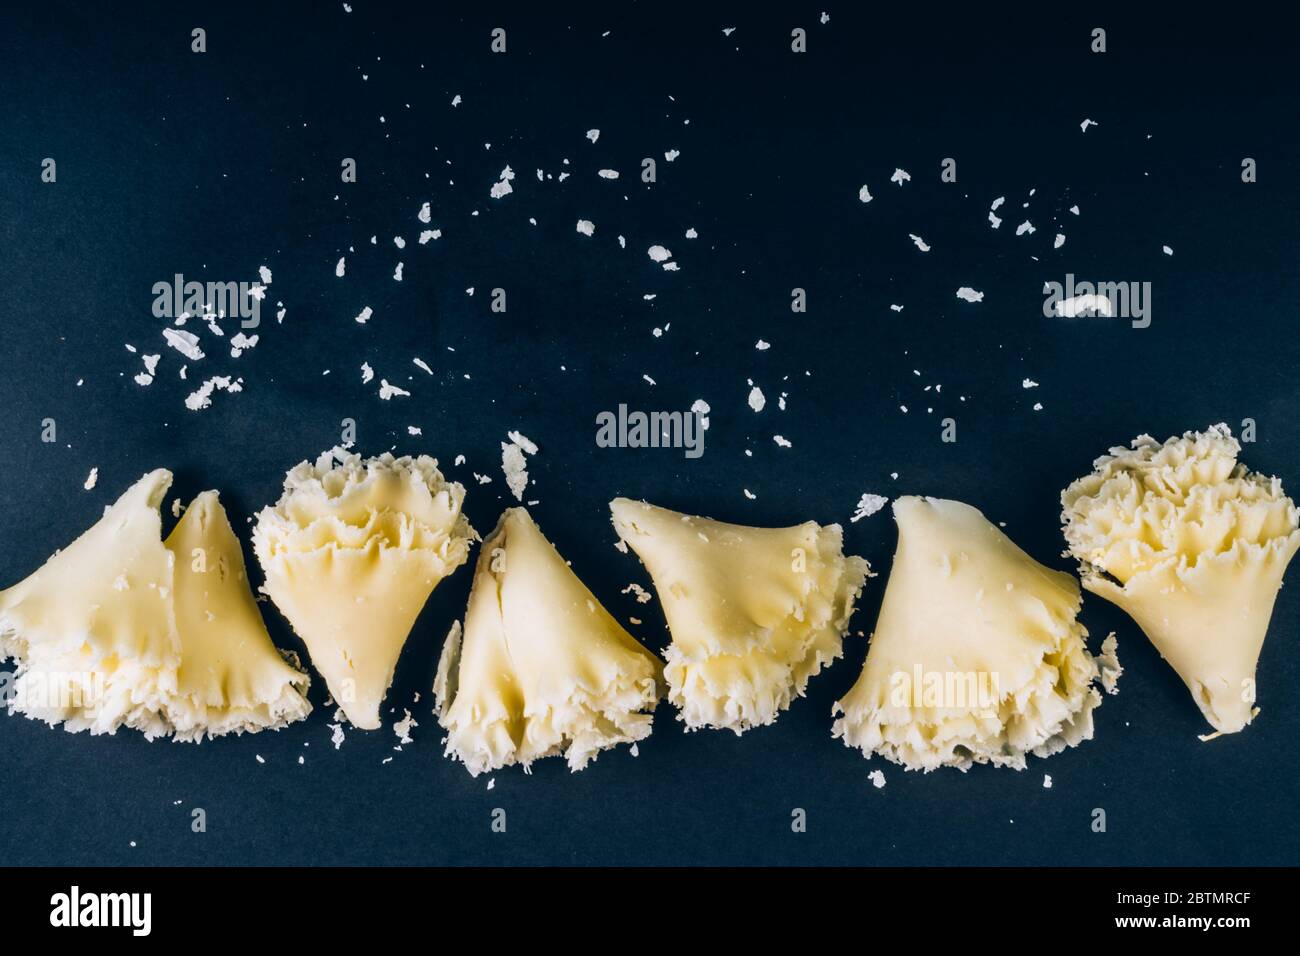 https://c8.alamy.com/comp/2BTMRCF/swiss-cheese-tete-de-moine-or-monastery-monks-head-scraped-with-a-girolle-special-knife-rosettes-on-a-dark-slate-background-copy-space-selective-2BTMRCF.jpg